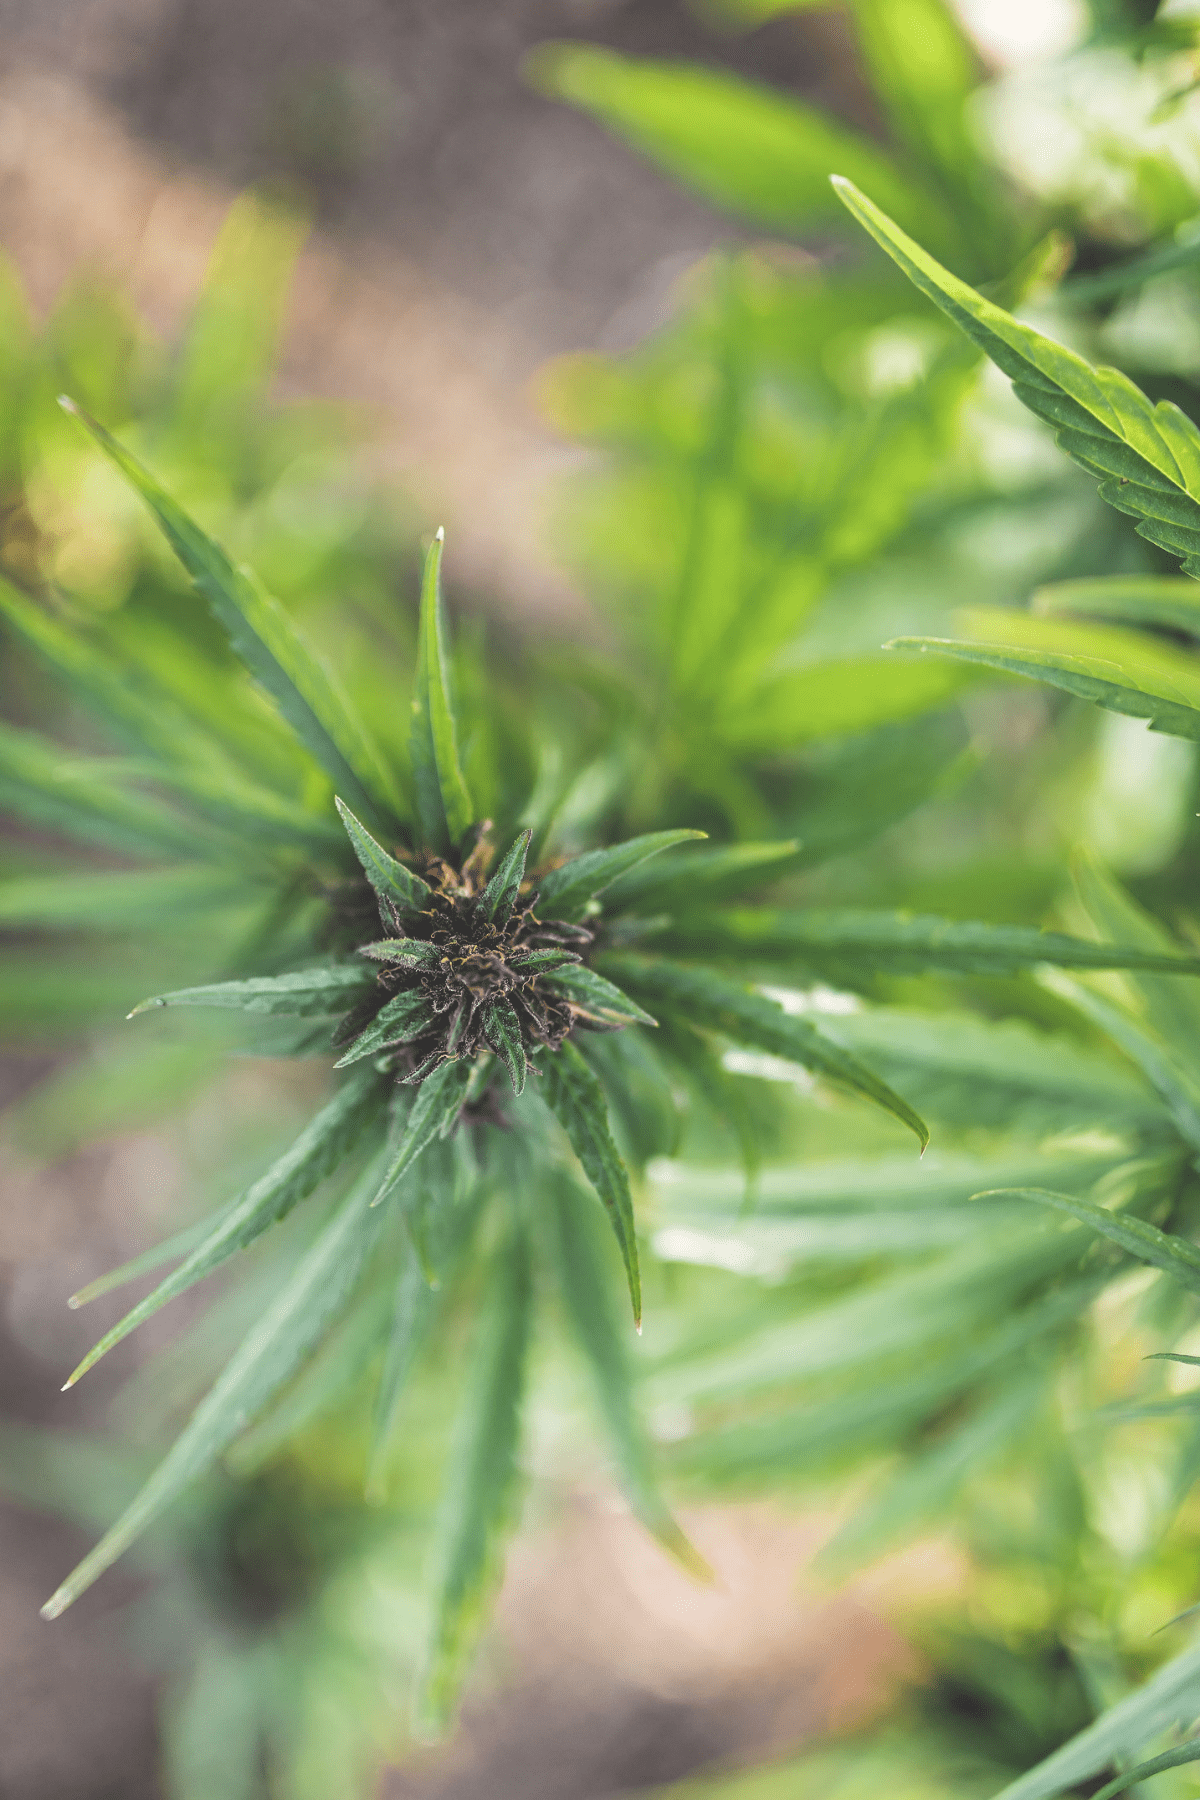 A picture of a cannabis plant.